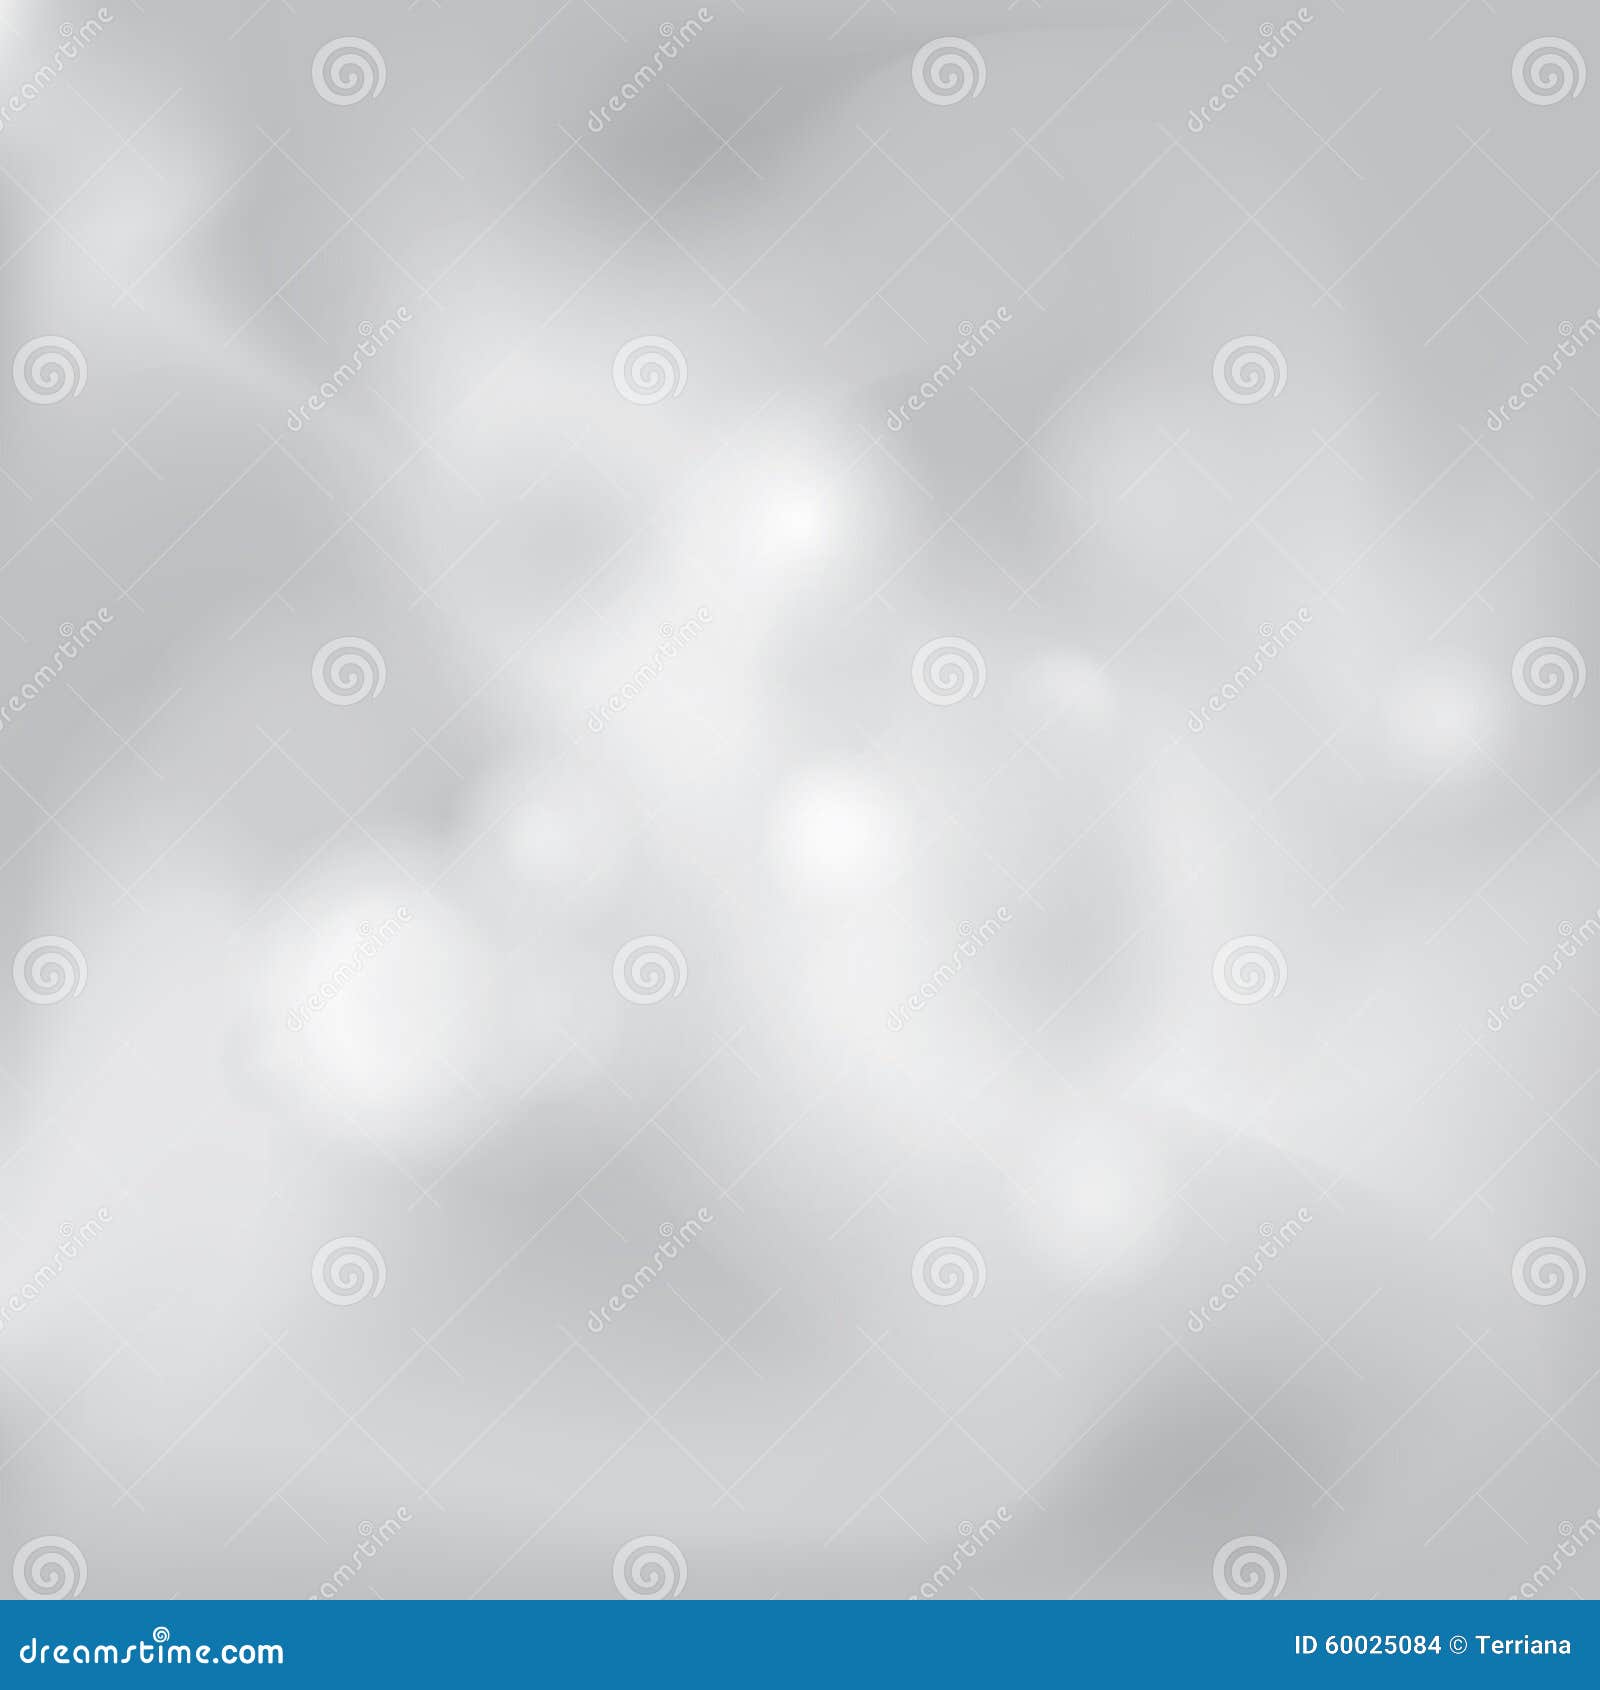 Abstract Blur Background Blurred Grey Texture Stock Illustration